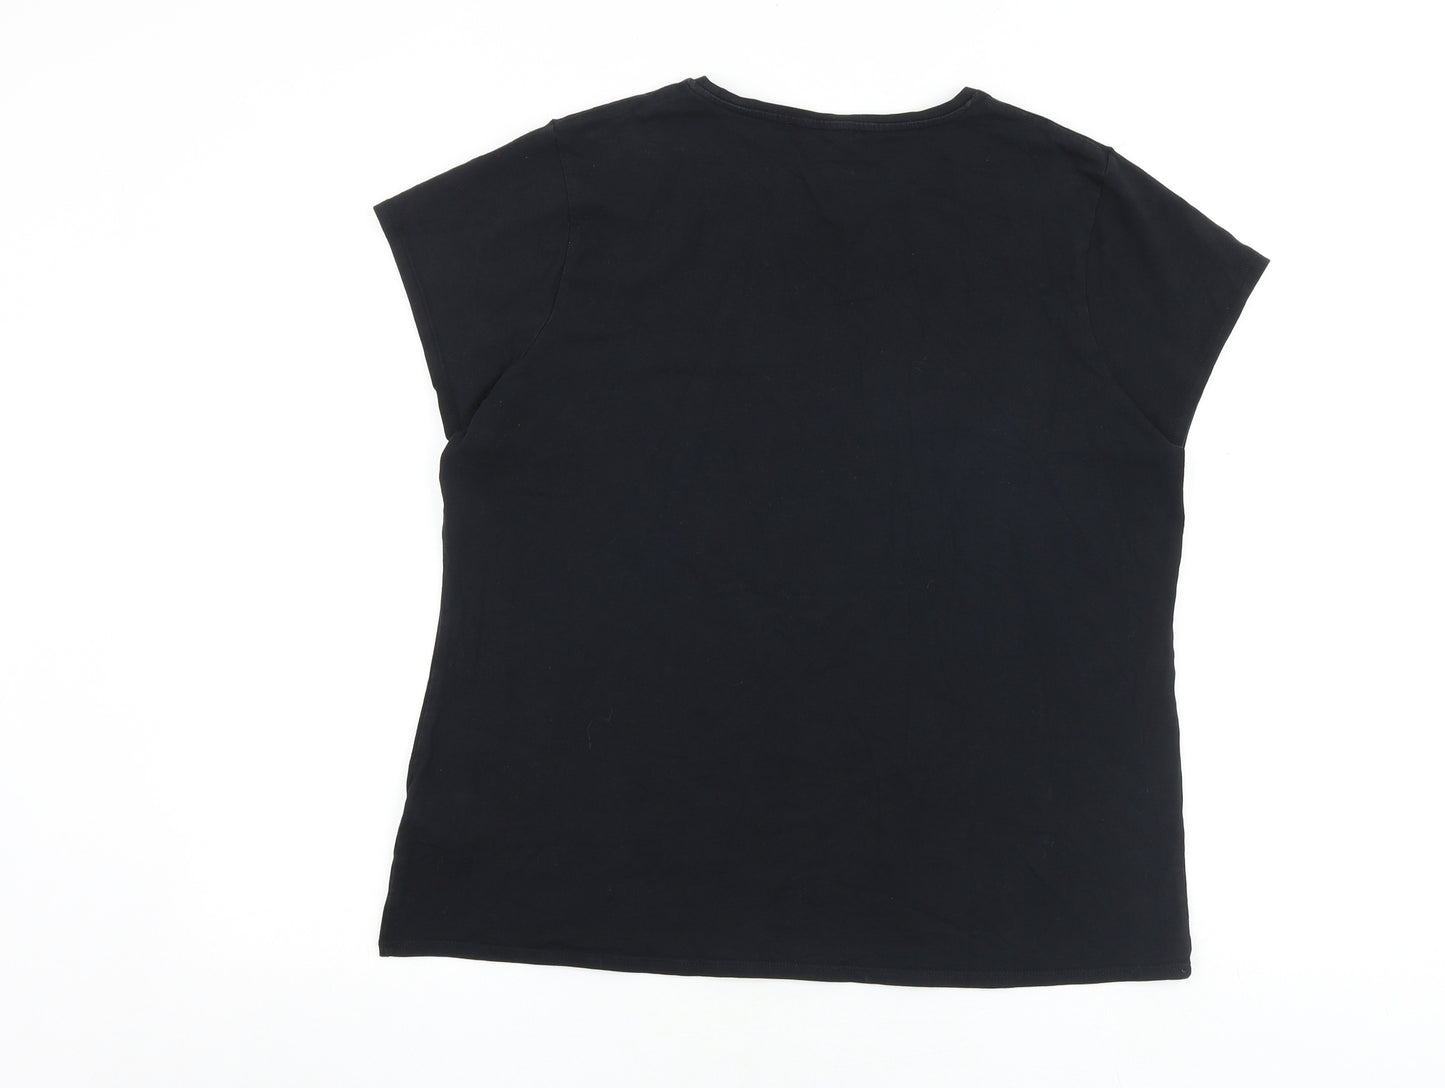 Marks and Spencer Womens Black Cotton Basic T-Shirt Size 20 Crew Neck